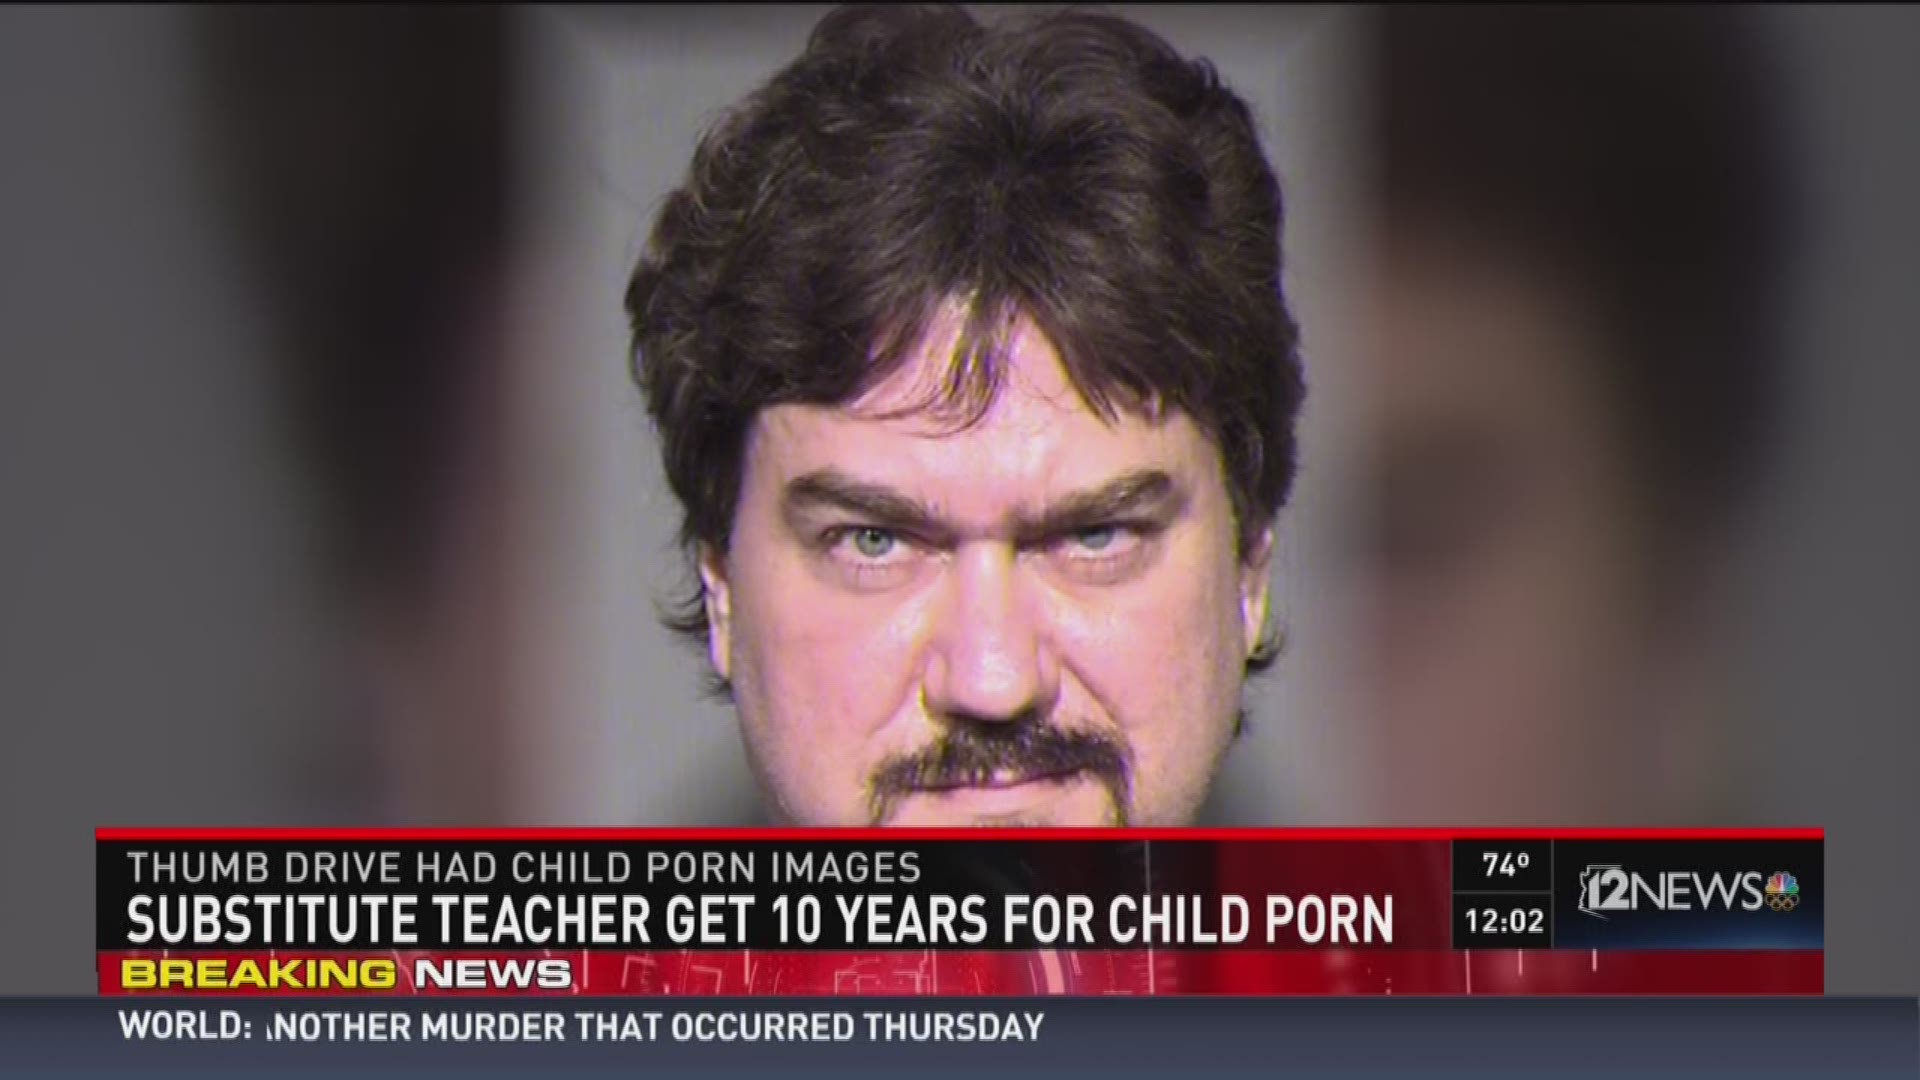 Hd Porn 10yers - Former substitute teacher gets 10 years for child porn | 12news.com